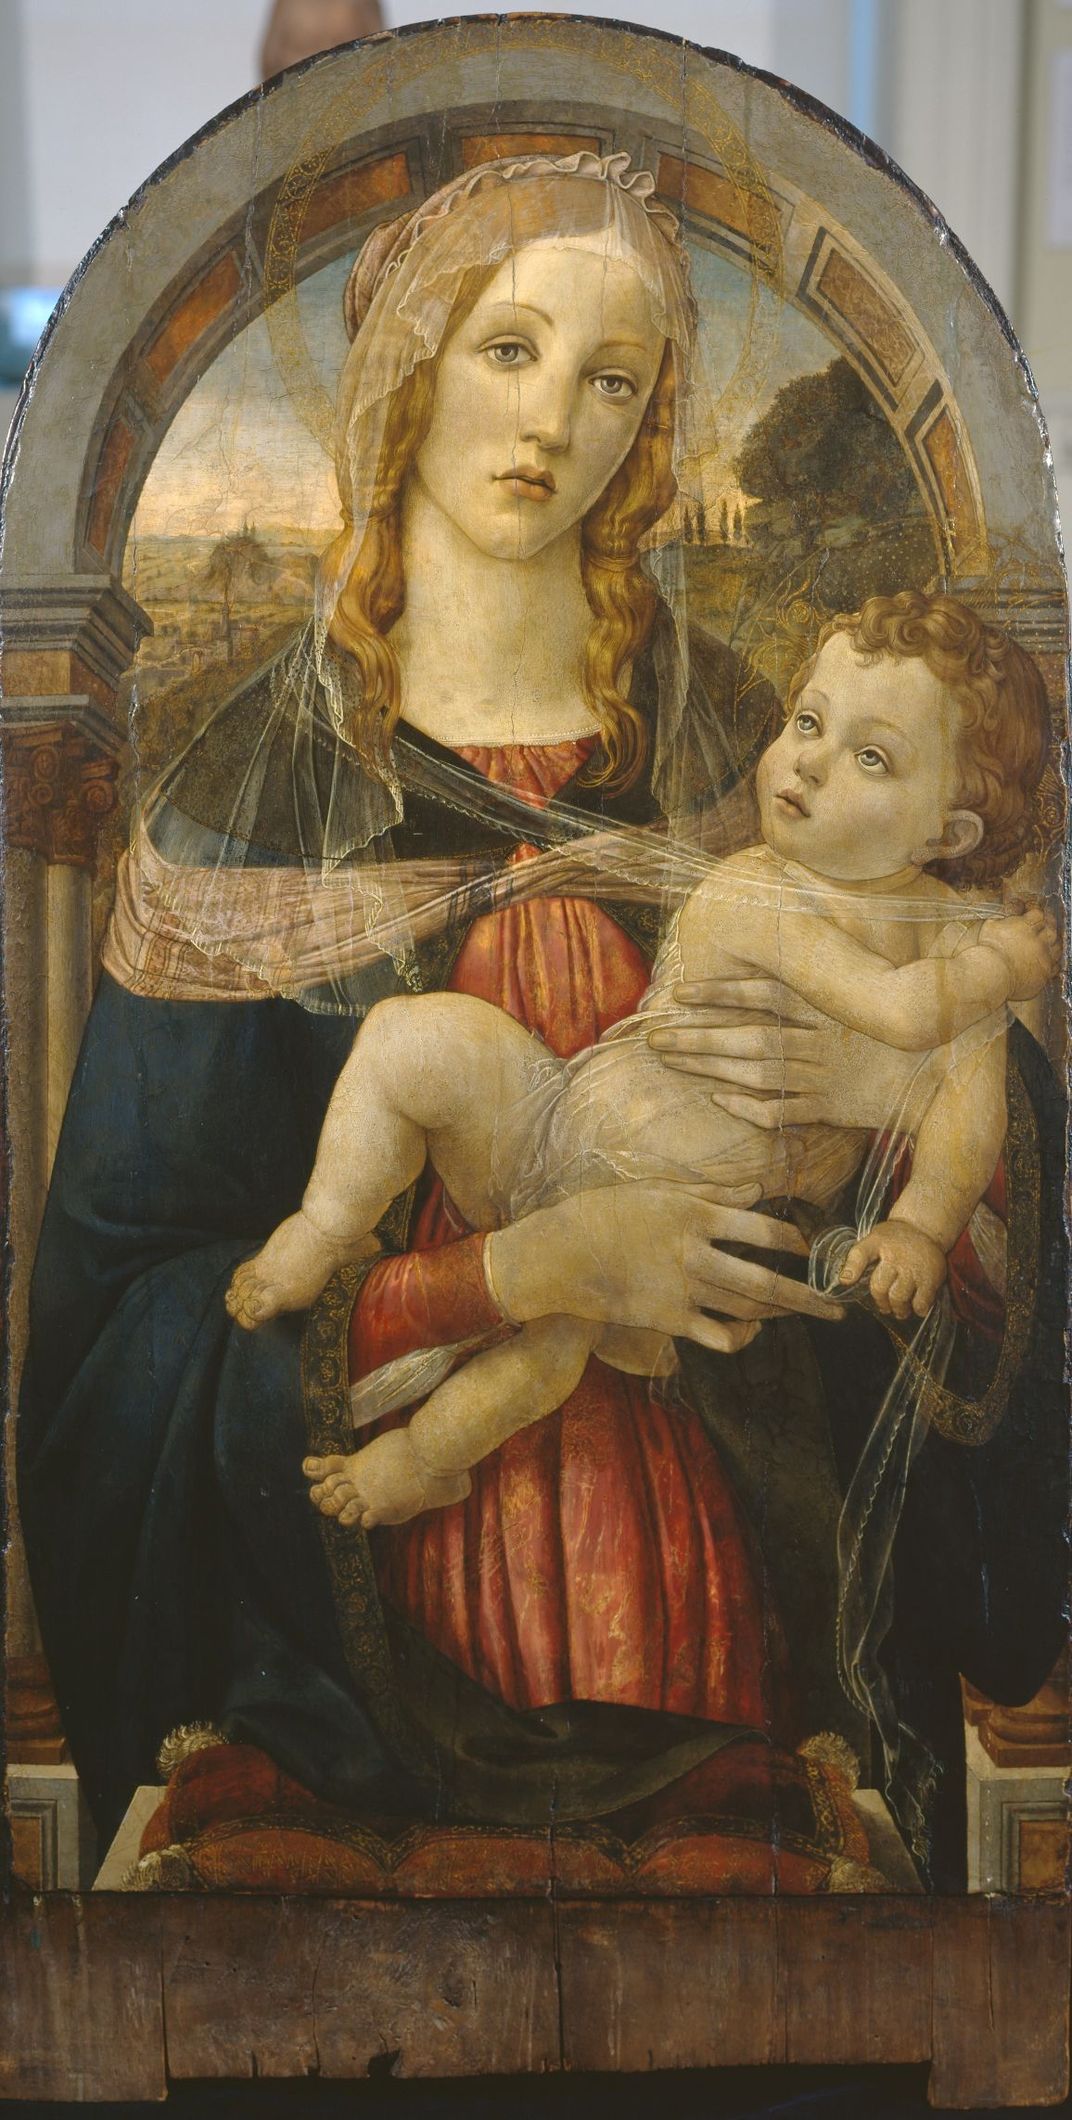 Botticelli forgery